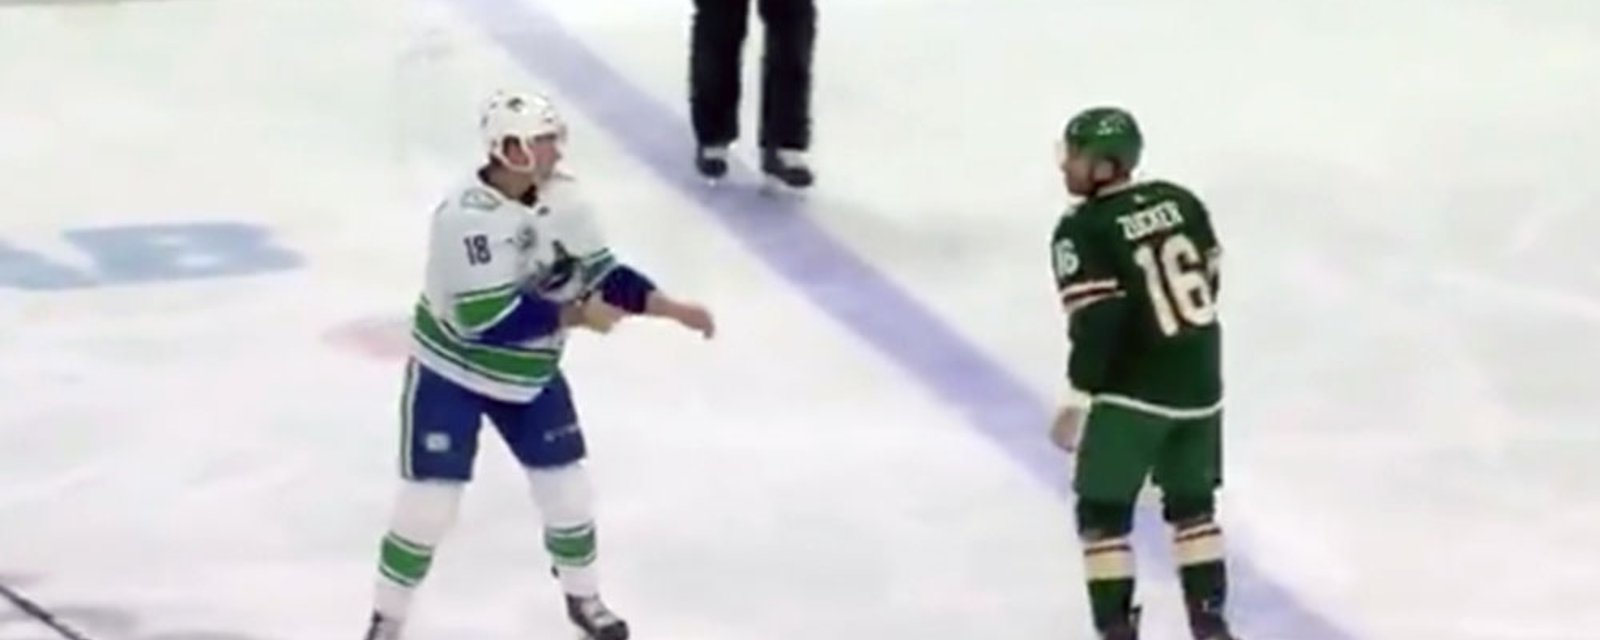 Virtanen and Zucker drop the gloves and put on a show in Minny